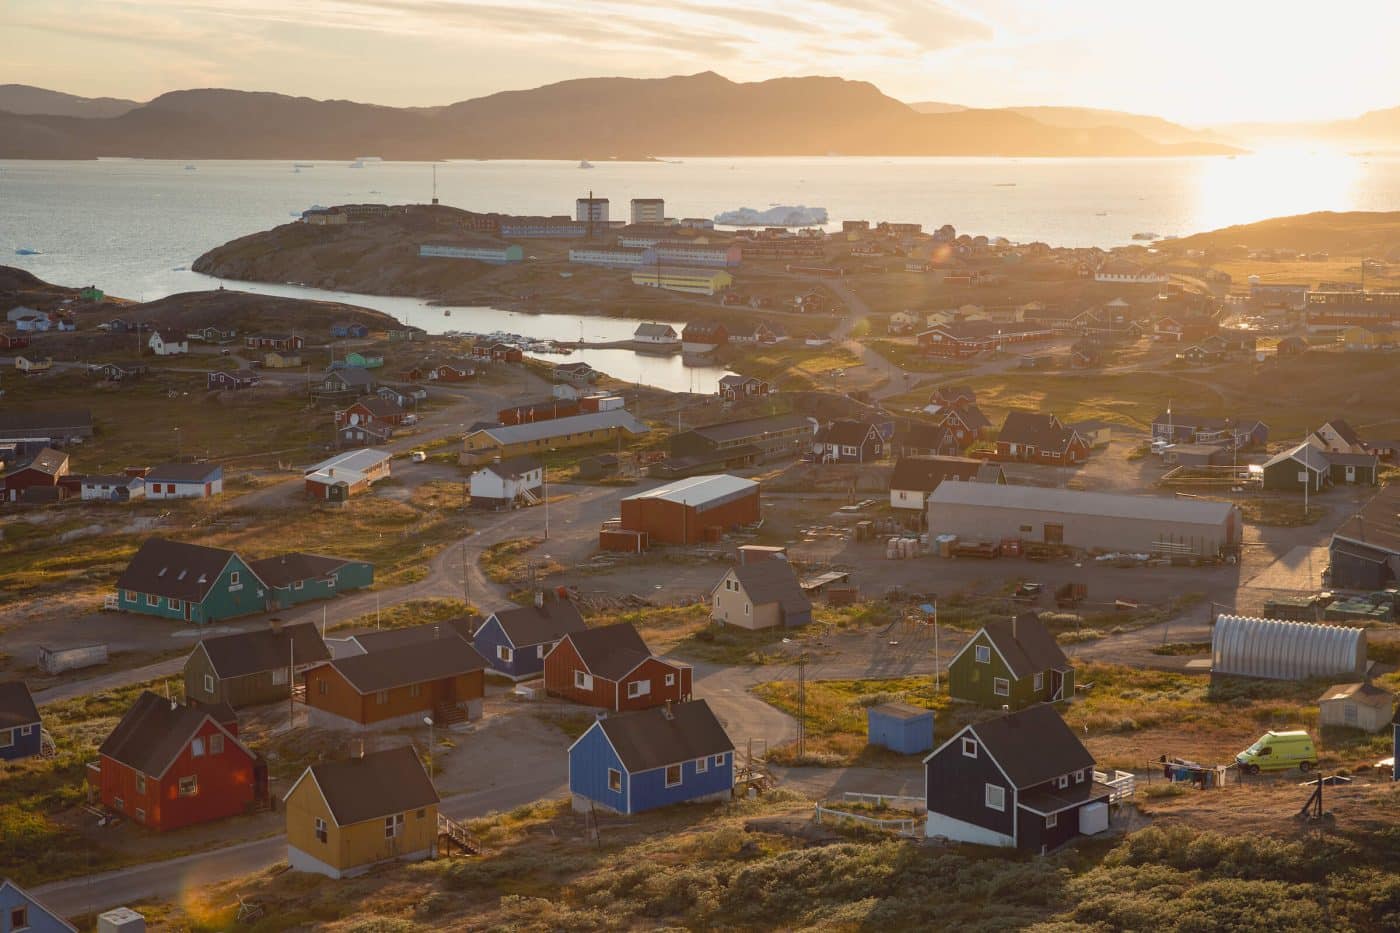 The sun sets over Narsaq in South Greenland. .Photo by Mads Pihl